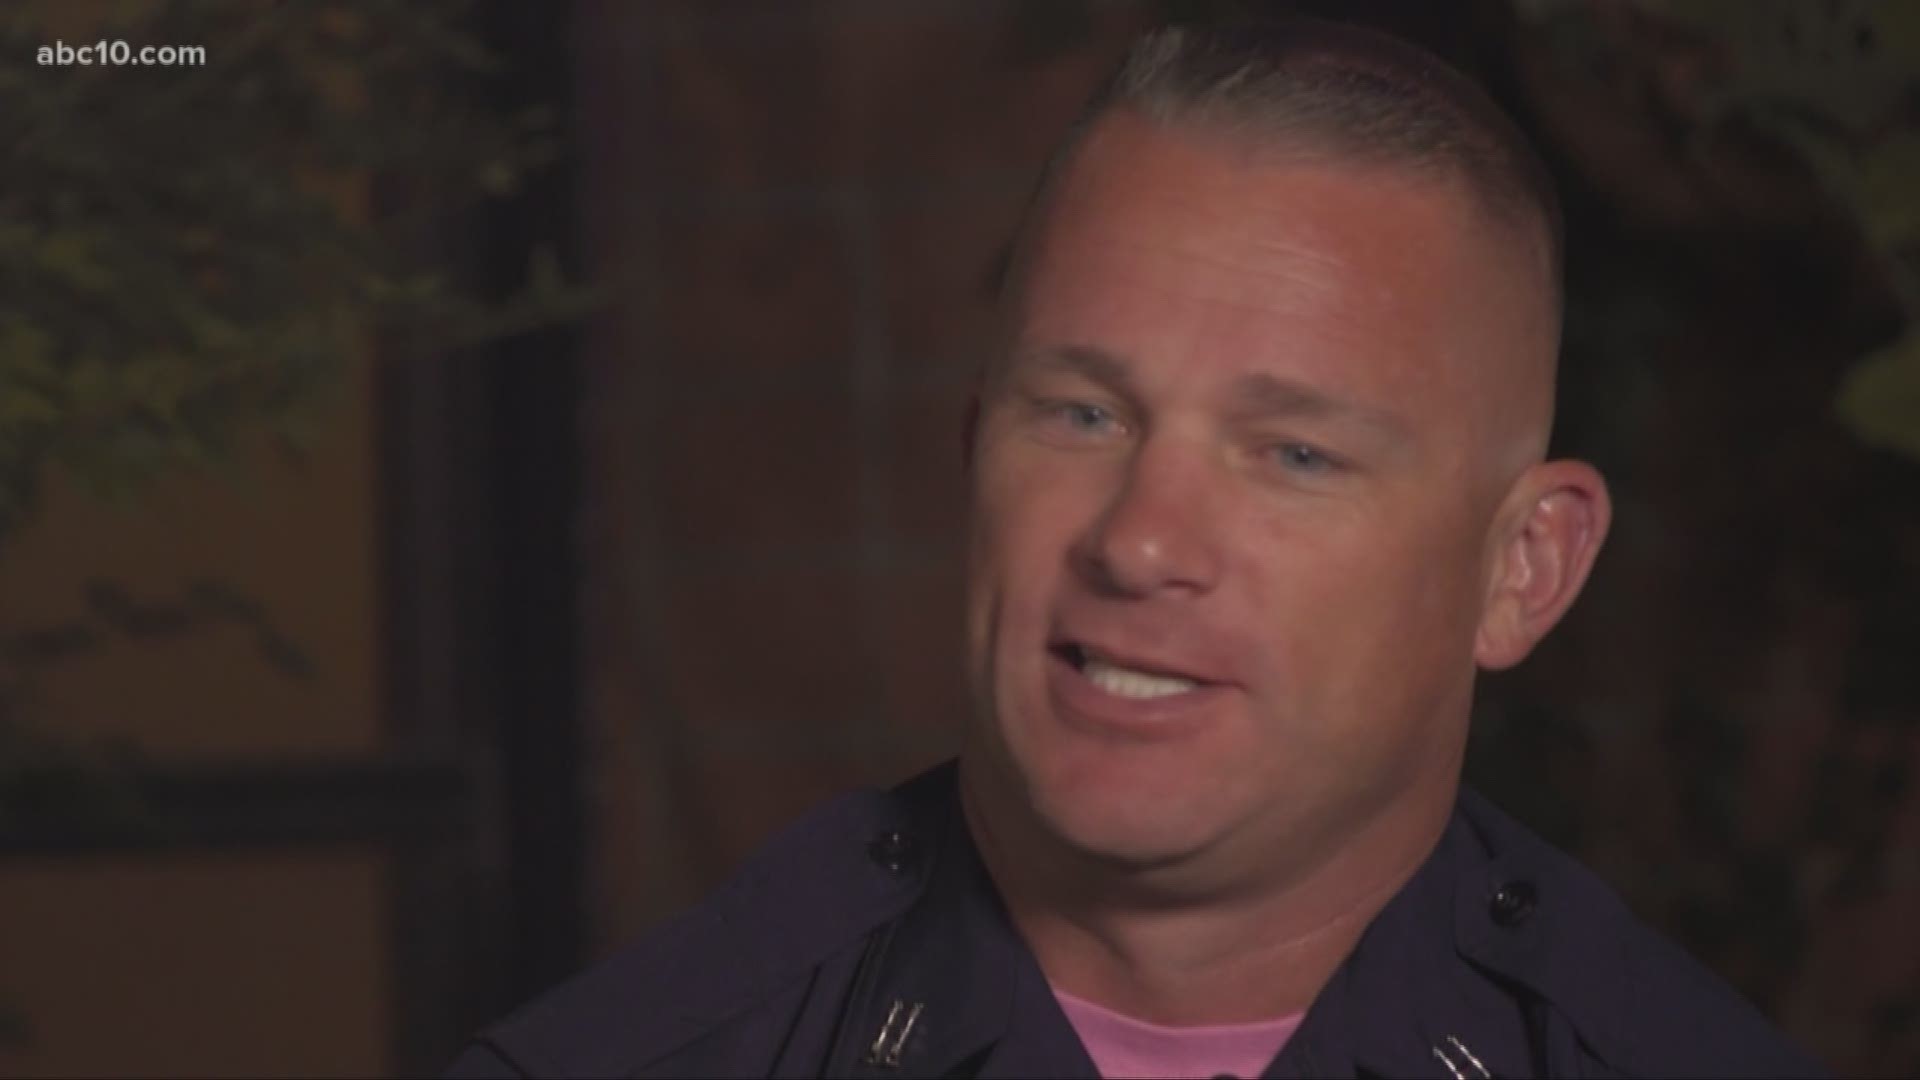 Sacramento Metro Fire Capt. Chris Vestal spoke with ABC10 to offer tips to residents on things they can do to stay safe before and during the PG&E power shutoffs.